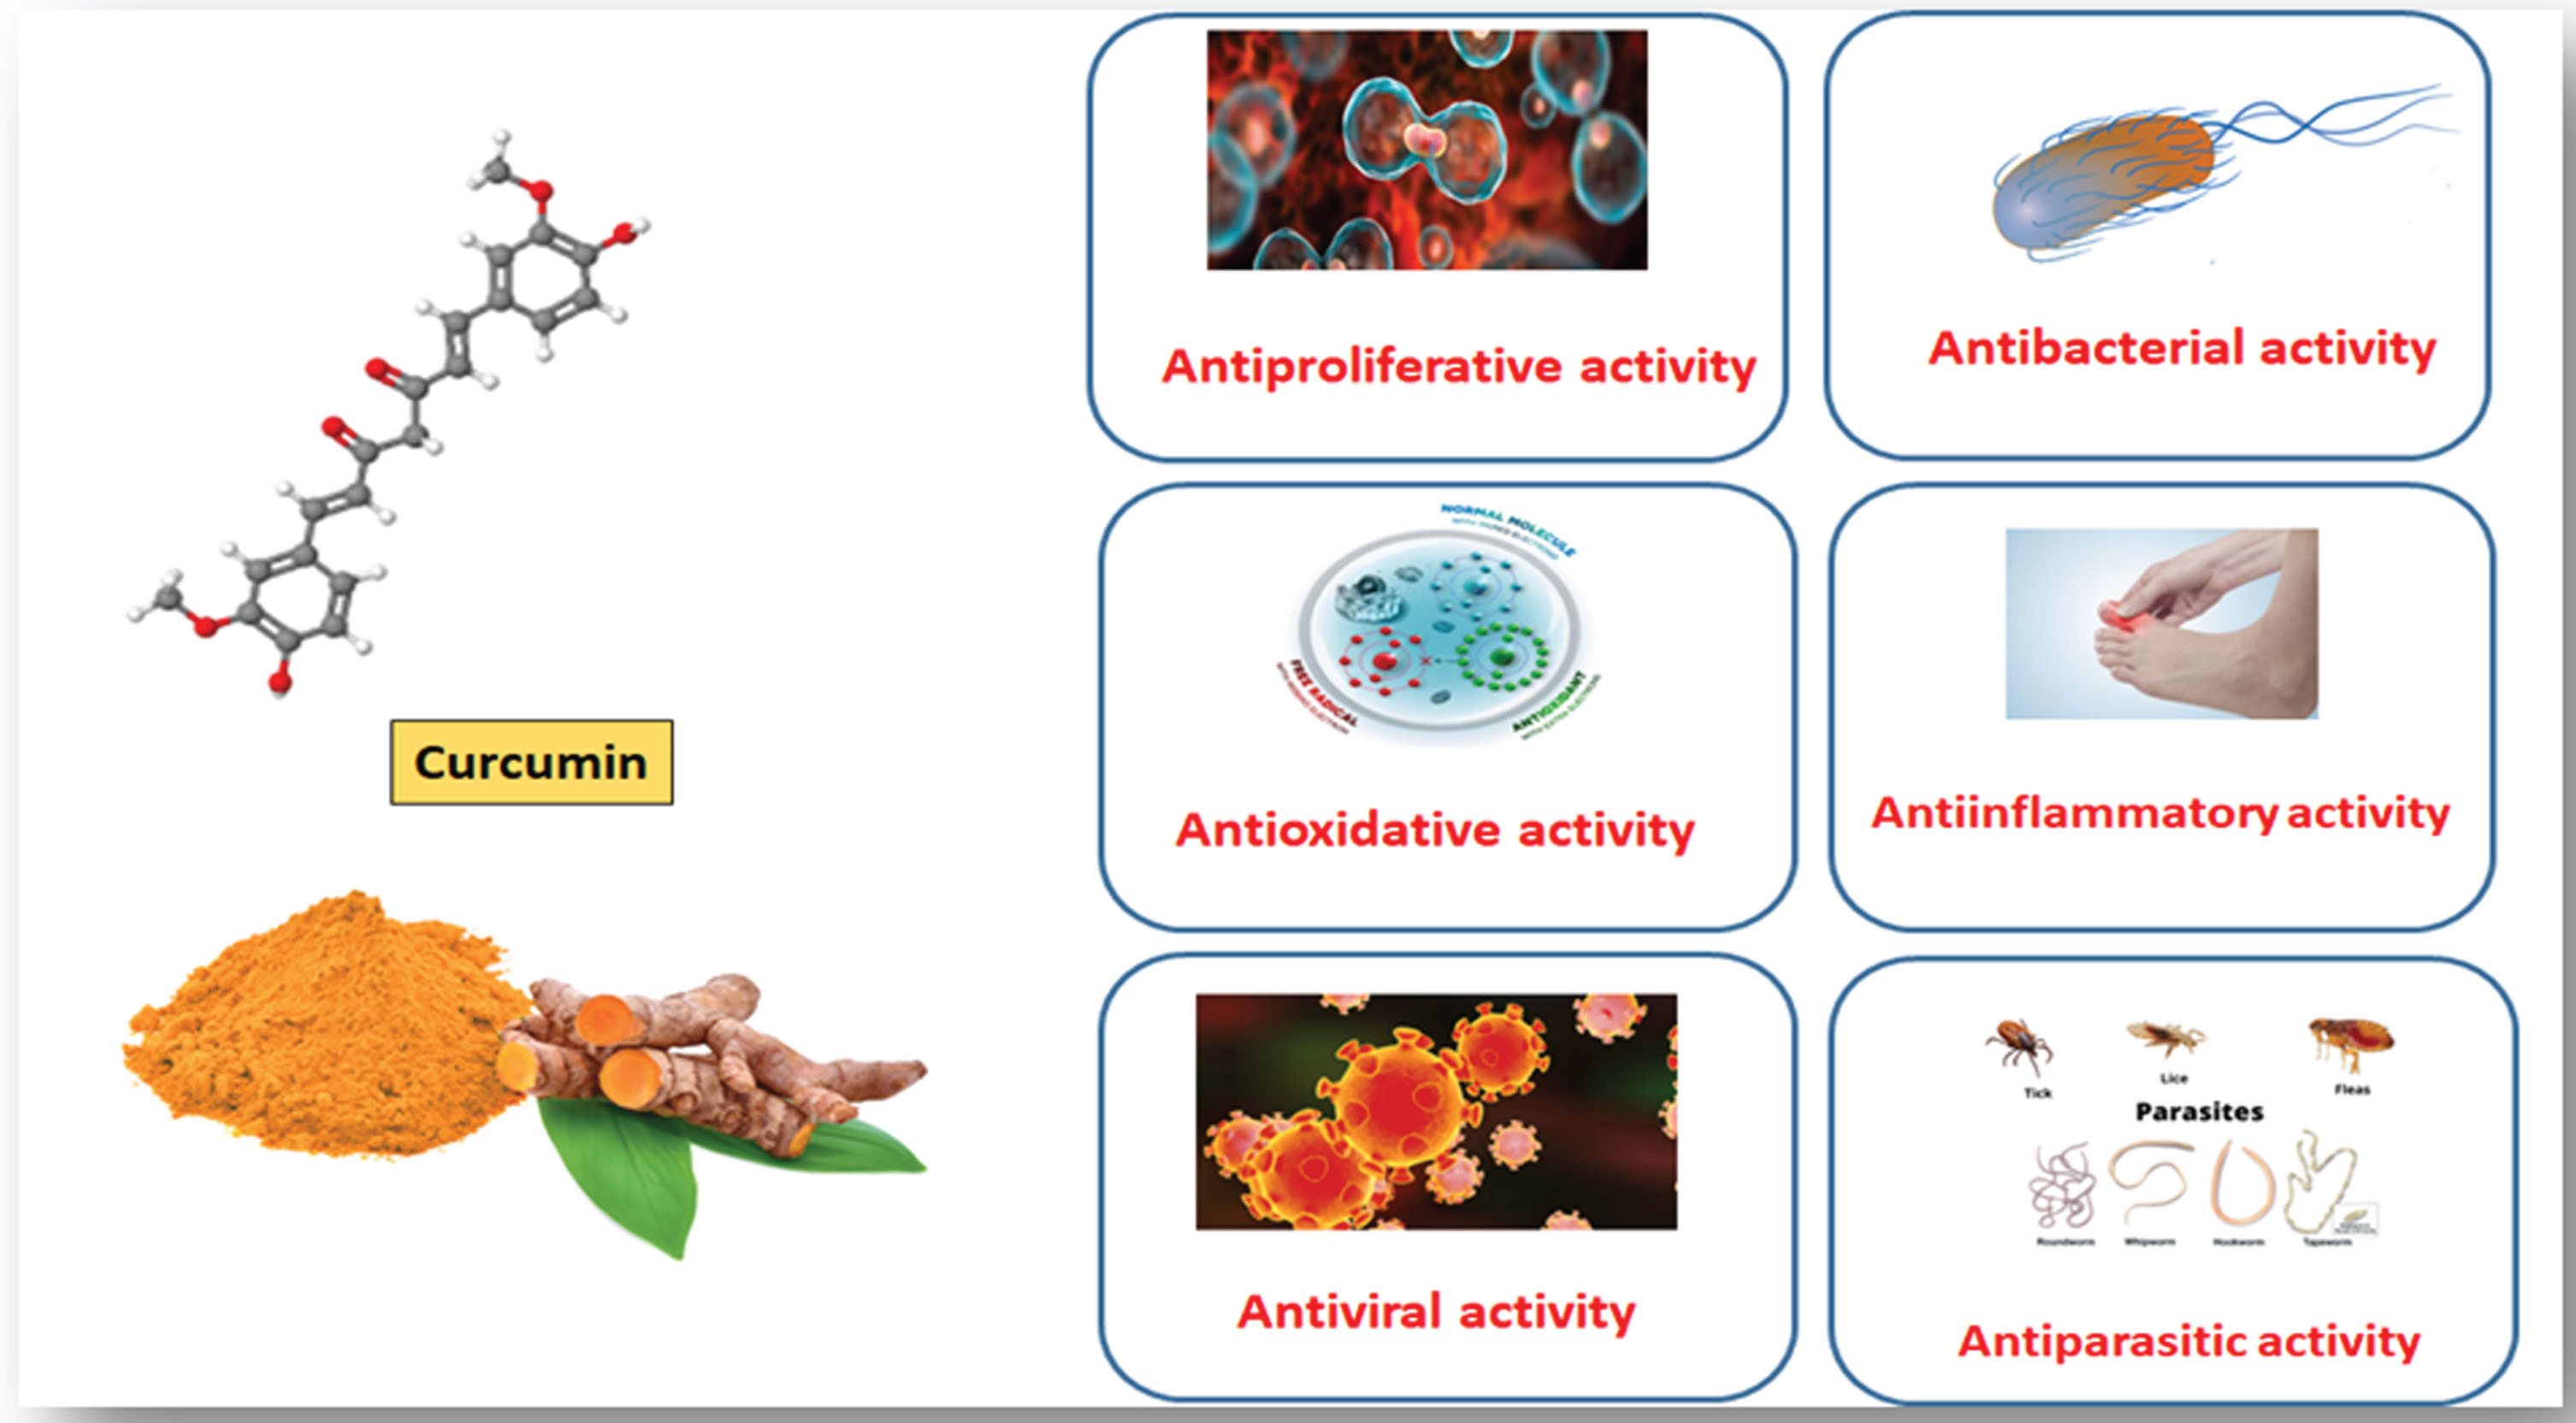 Depicts numerous pharmacological and pleiotropic benefits of curcumin including anti-inflammatory, anti-bacterial, antineoplastic, and antioxidant properties.